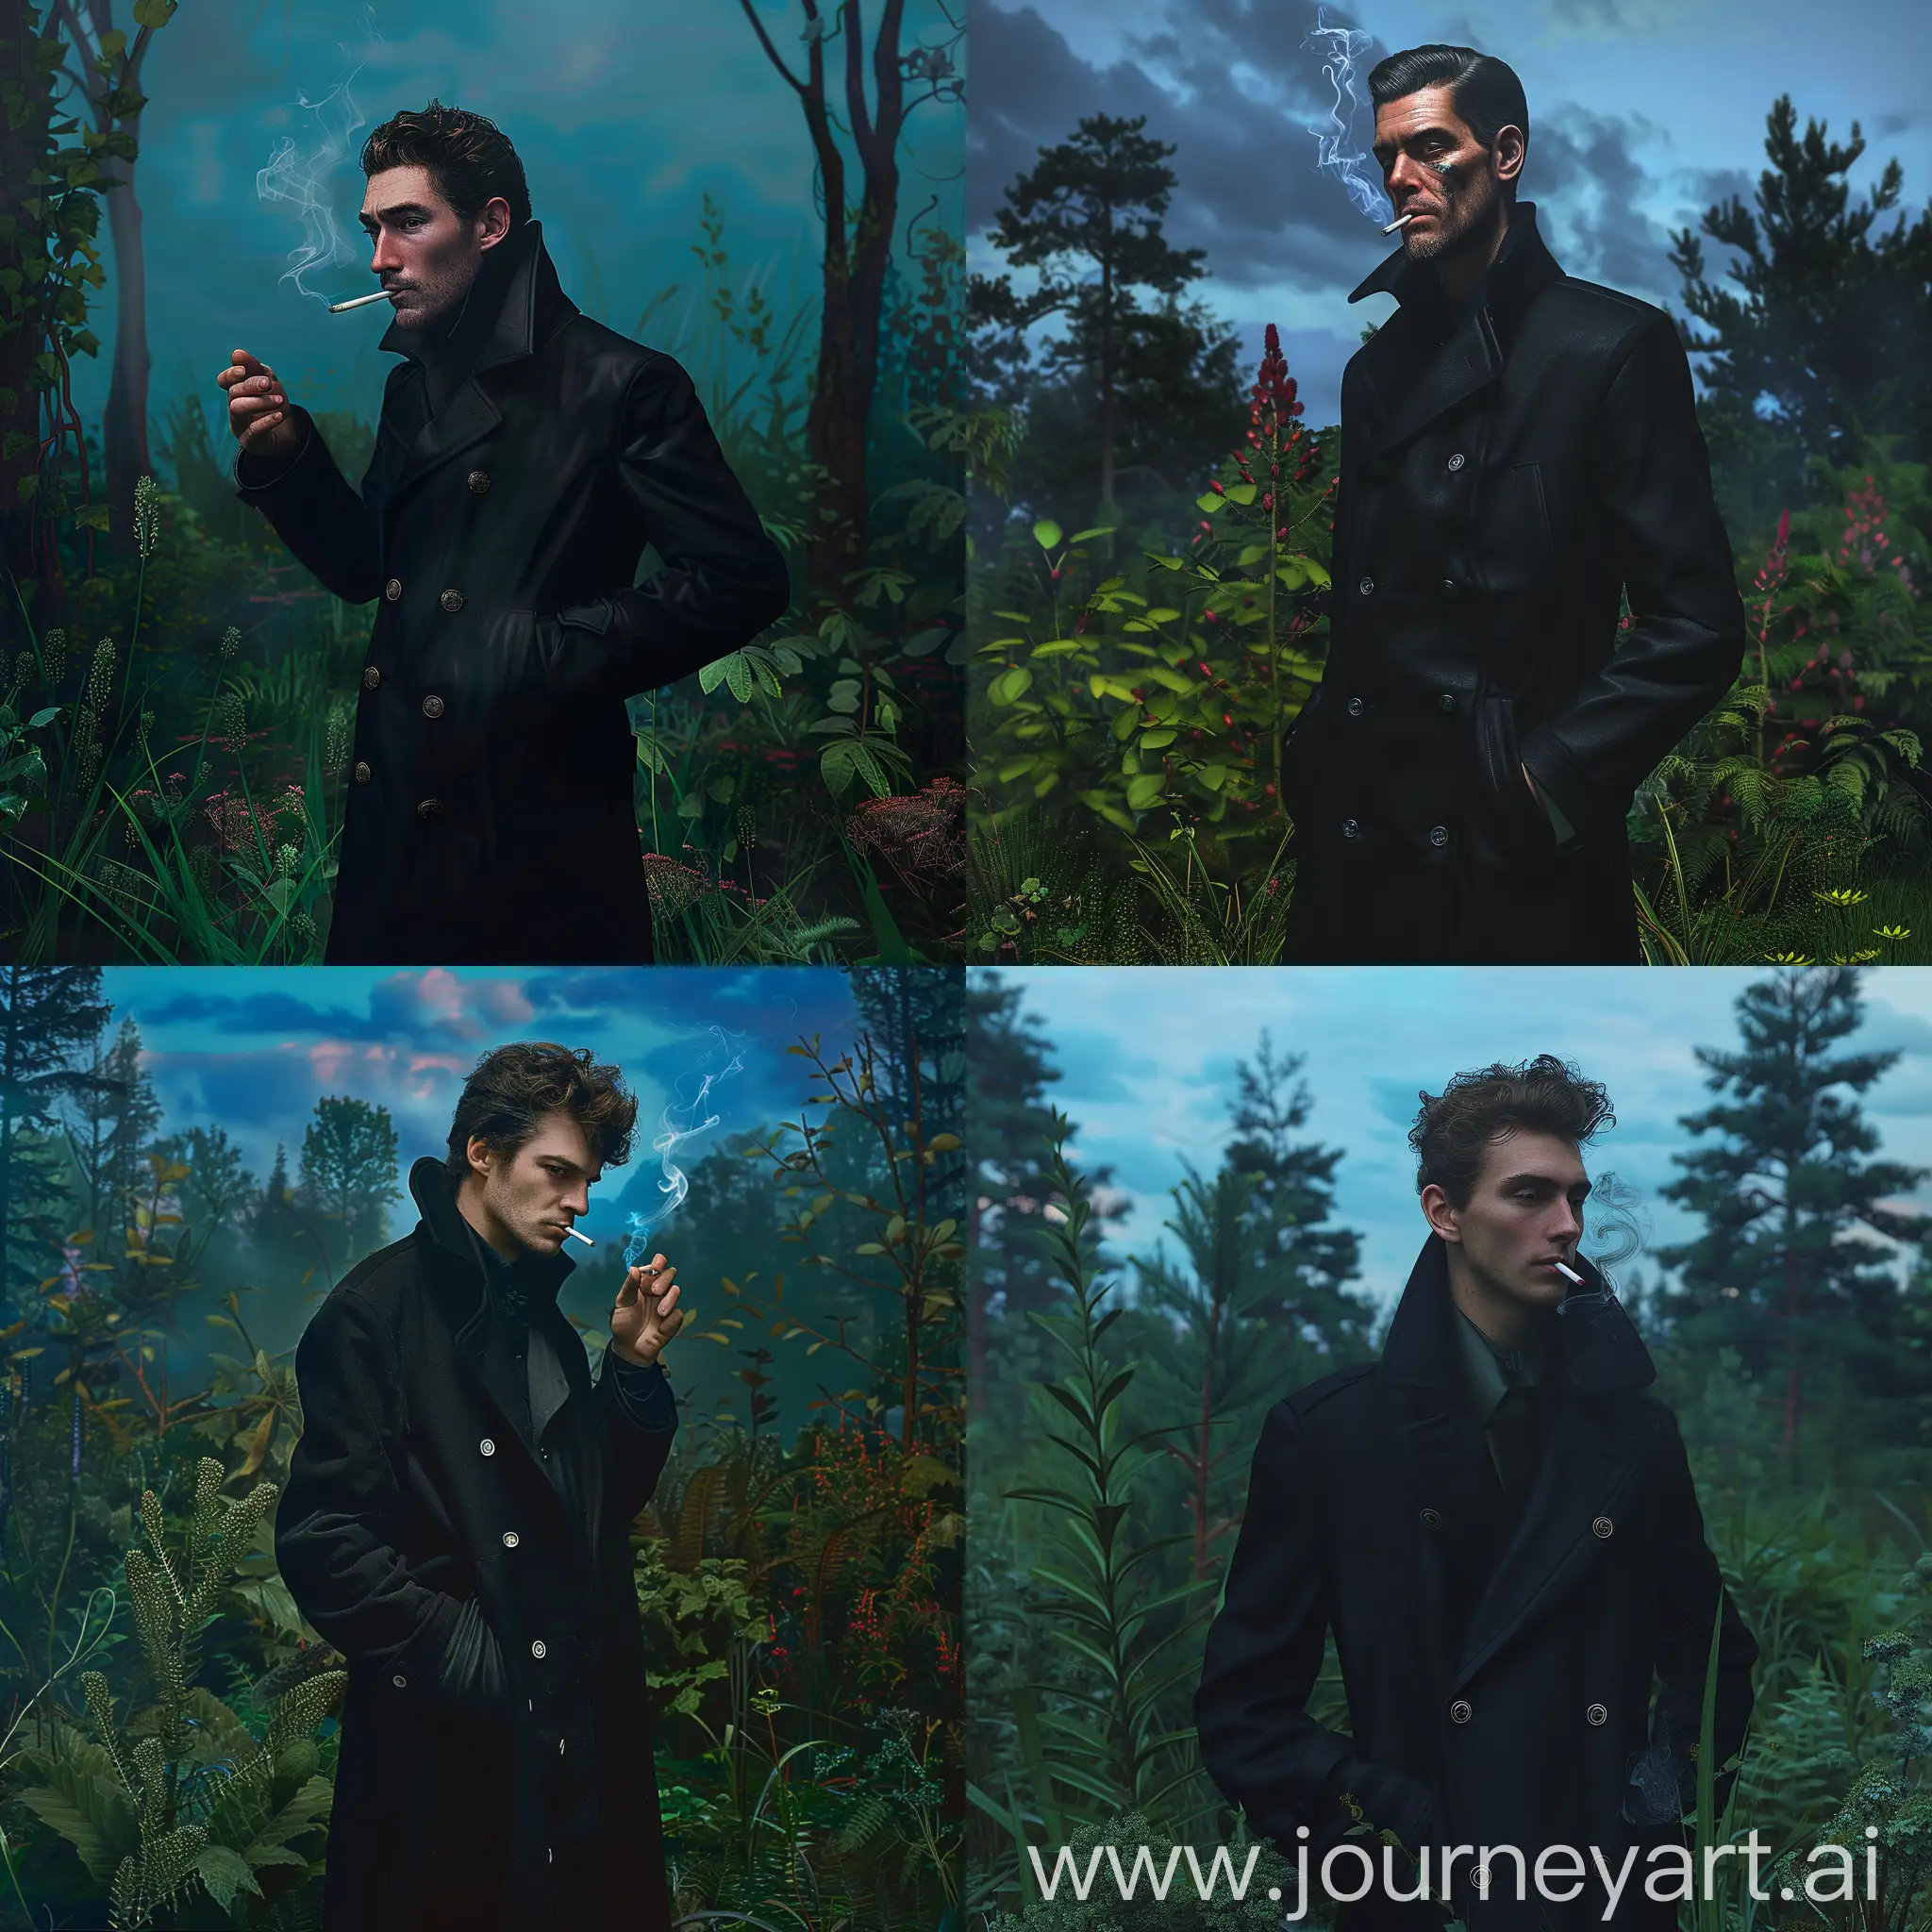 Thomas-Shelby-Smoking-a-Cigarette-in-Enchanting-Forest-Setting